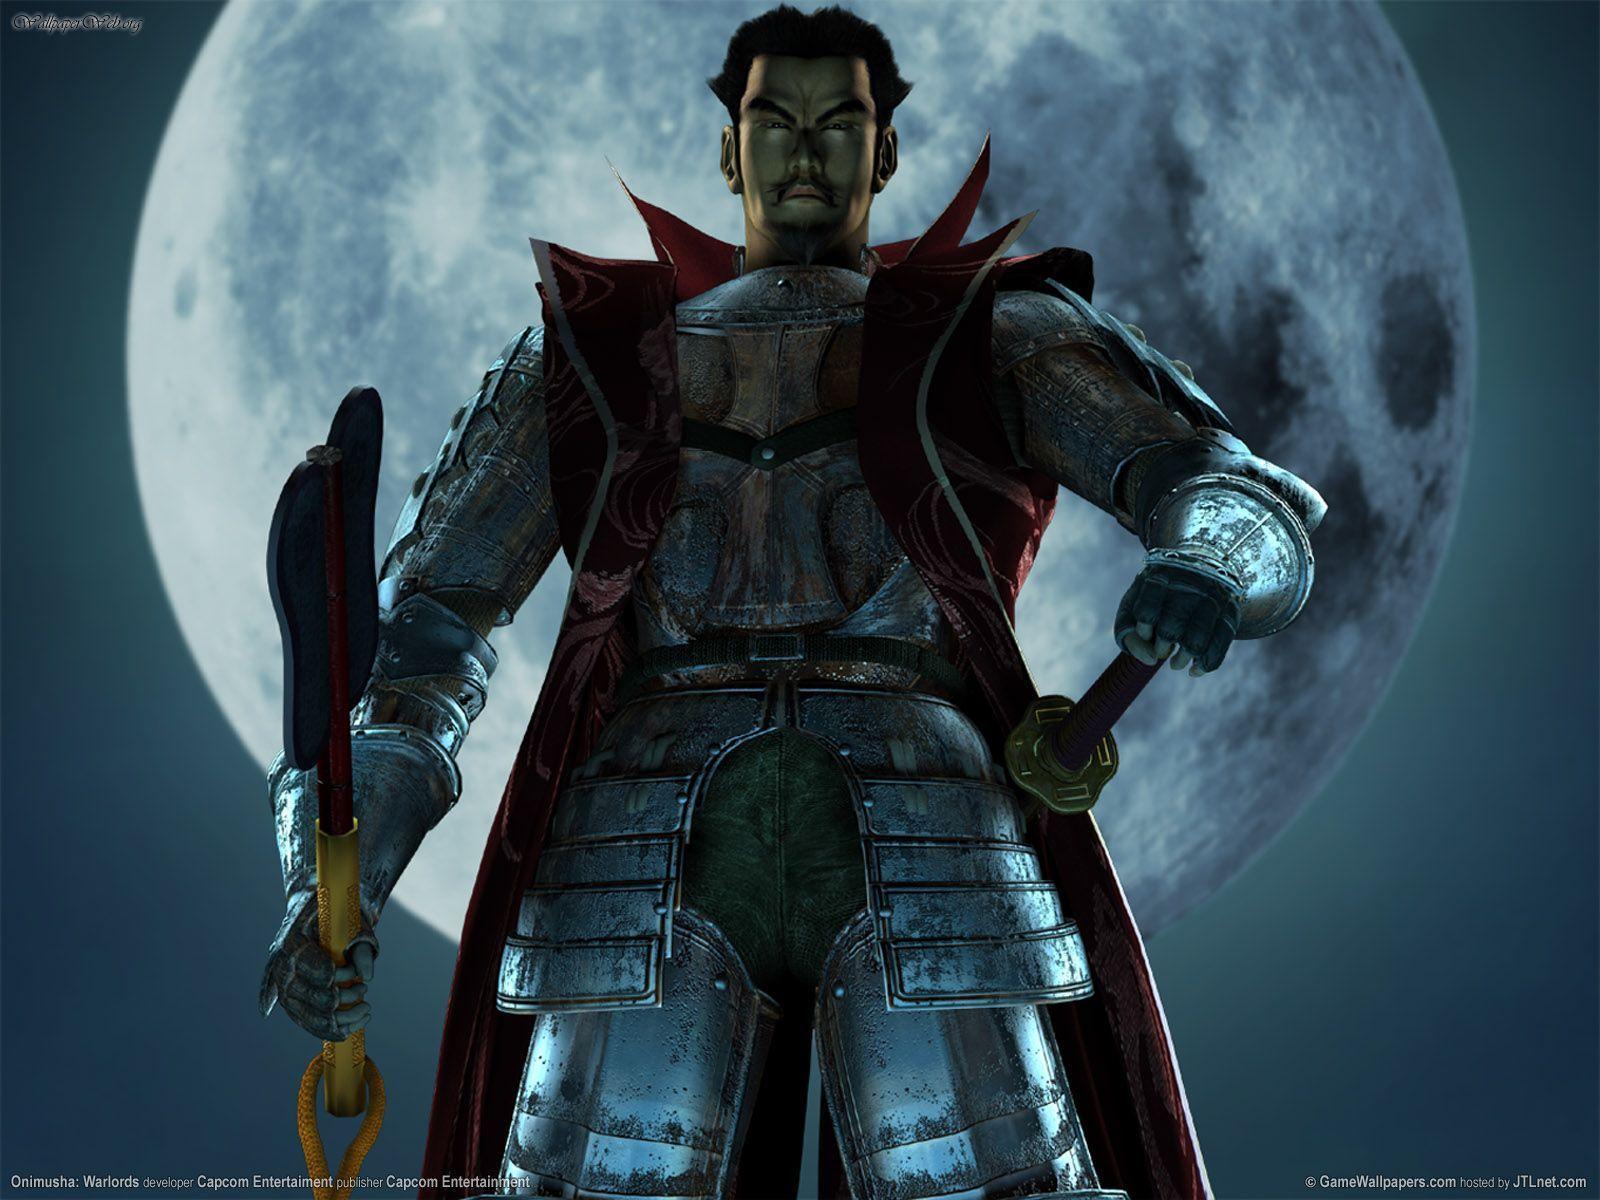 Games: Onimusha: Warlords, picture nr. 30116